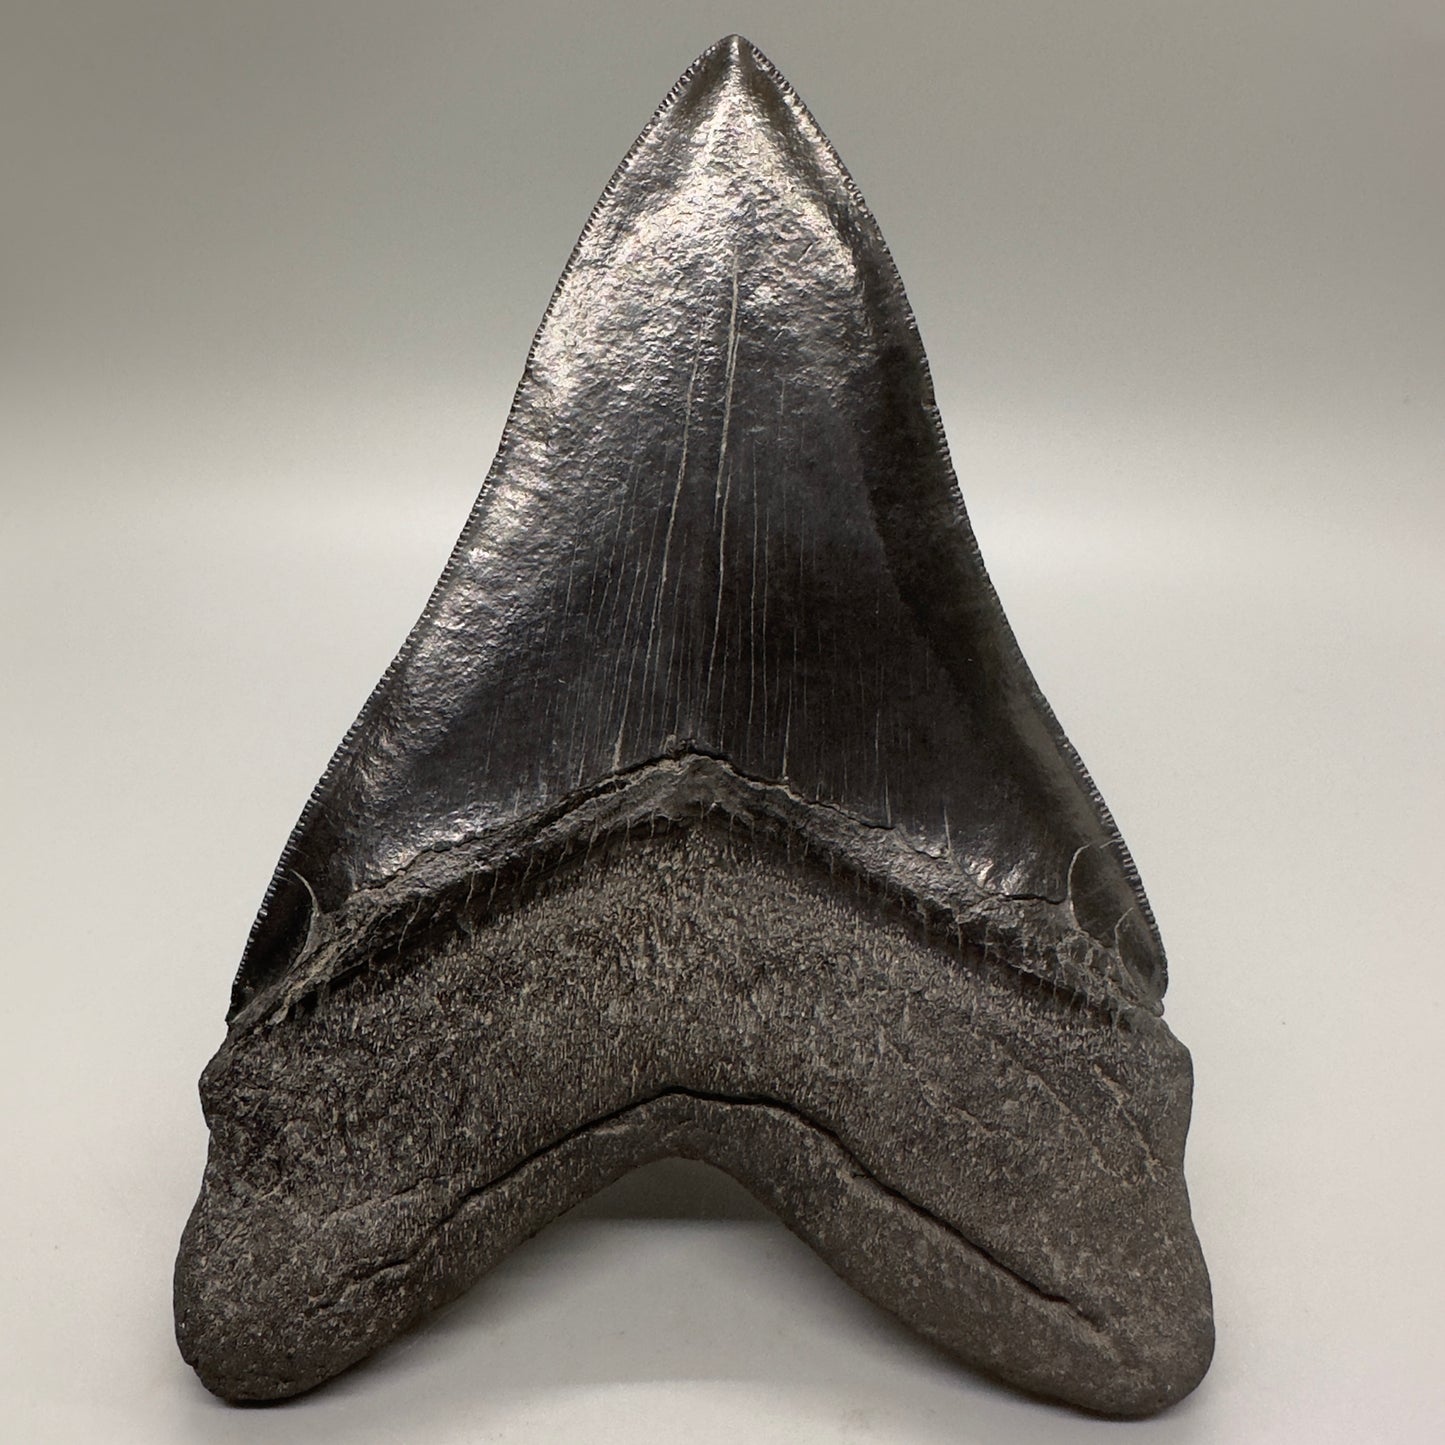 EXTRA LARGE 6.04" Fossil Megalodon Tooth: Scuba Diving, USA